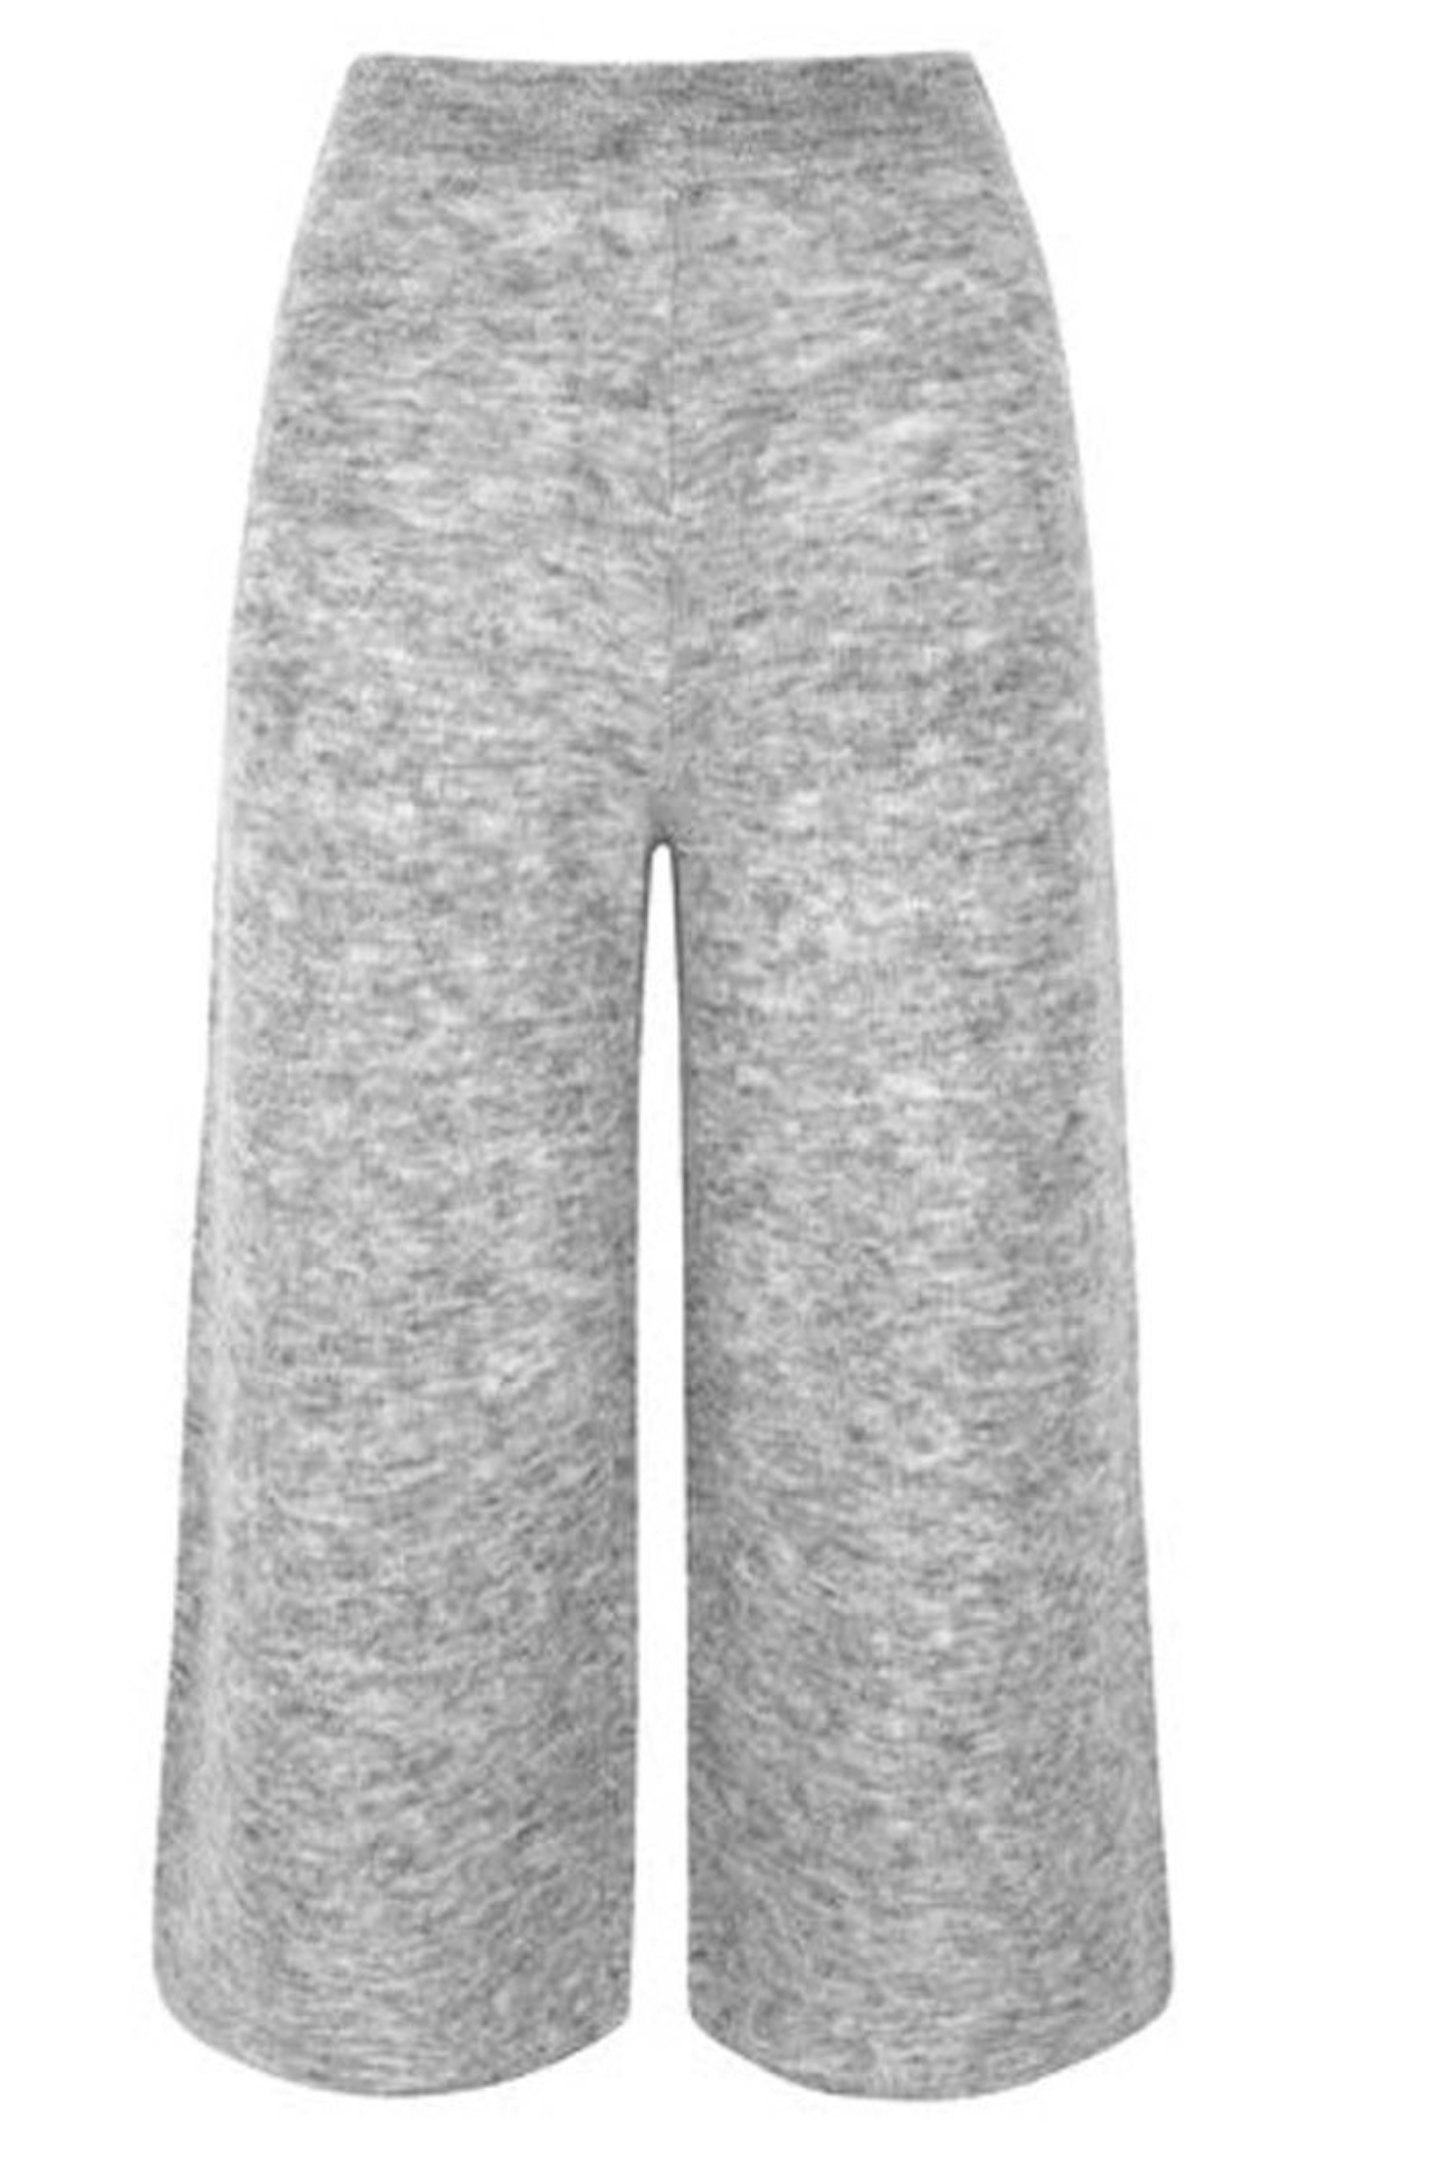 Whistles Mohair Knitted culottes, £130.00